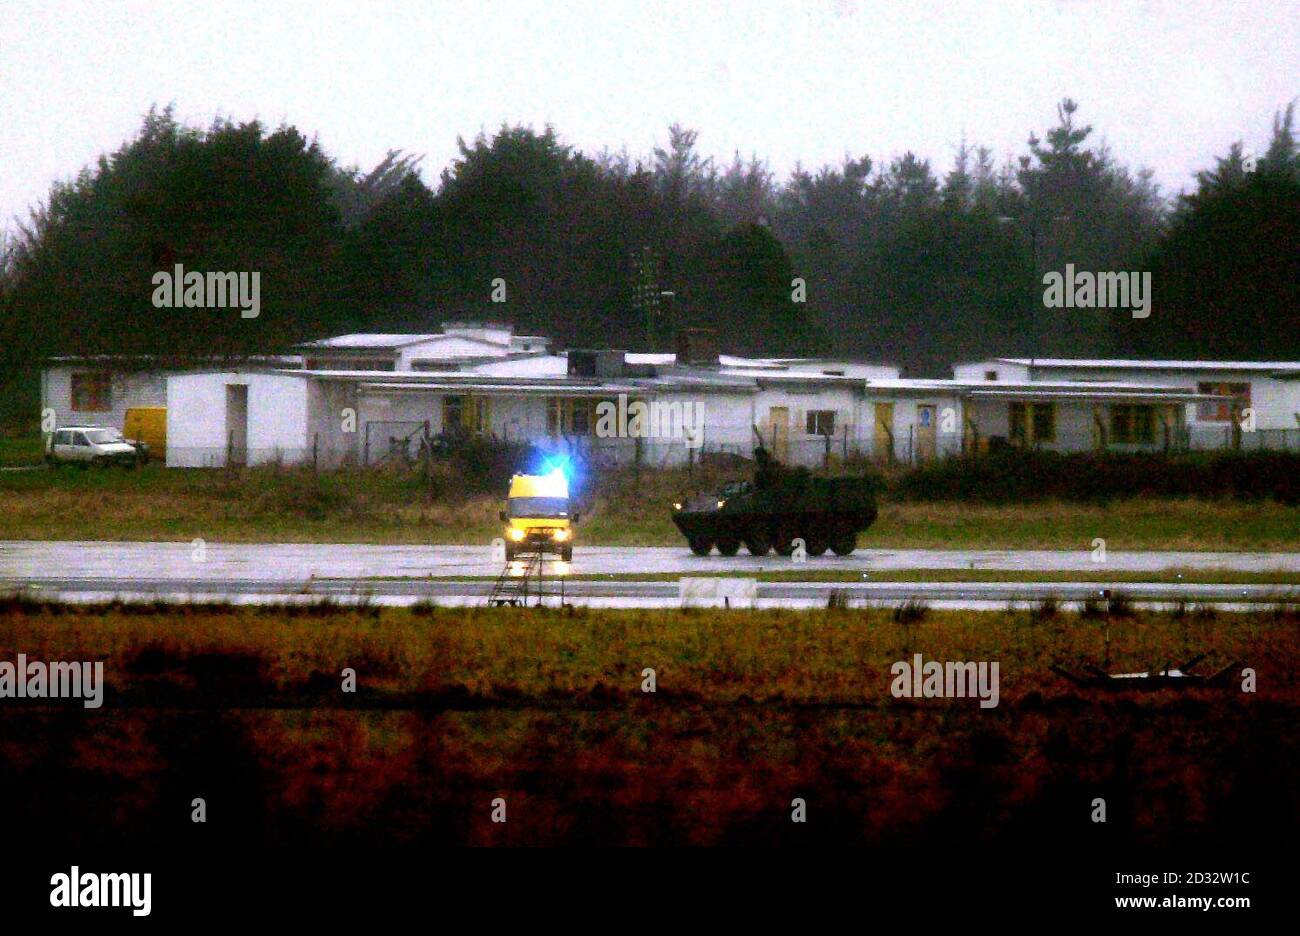 An armoured personnel carrier patrols the runway of Shannon airport in Co. Clare, Ireland, after recent attacks by peace protesters on US planes refuelling at the airport.    *..Some 120 soldiers have moved in to provide 24-hour security at the airport after a US navy plane was vandalised twice while refuelling on its way to the Gulf region. Peace protesters have opposed the use of the airport by aircraft carrying US troops to the Gulf.   Stock Photo